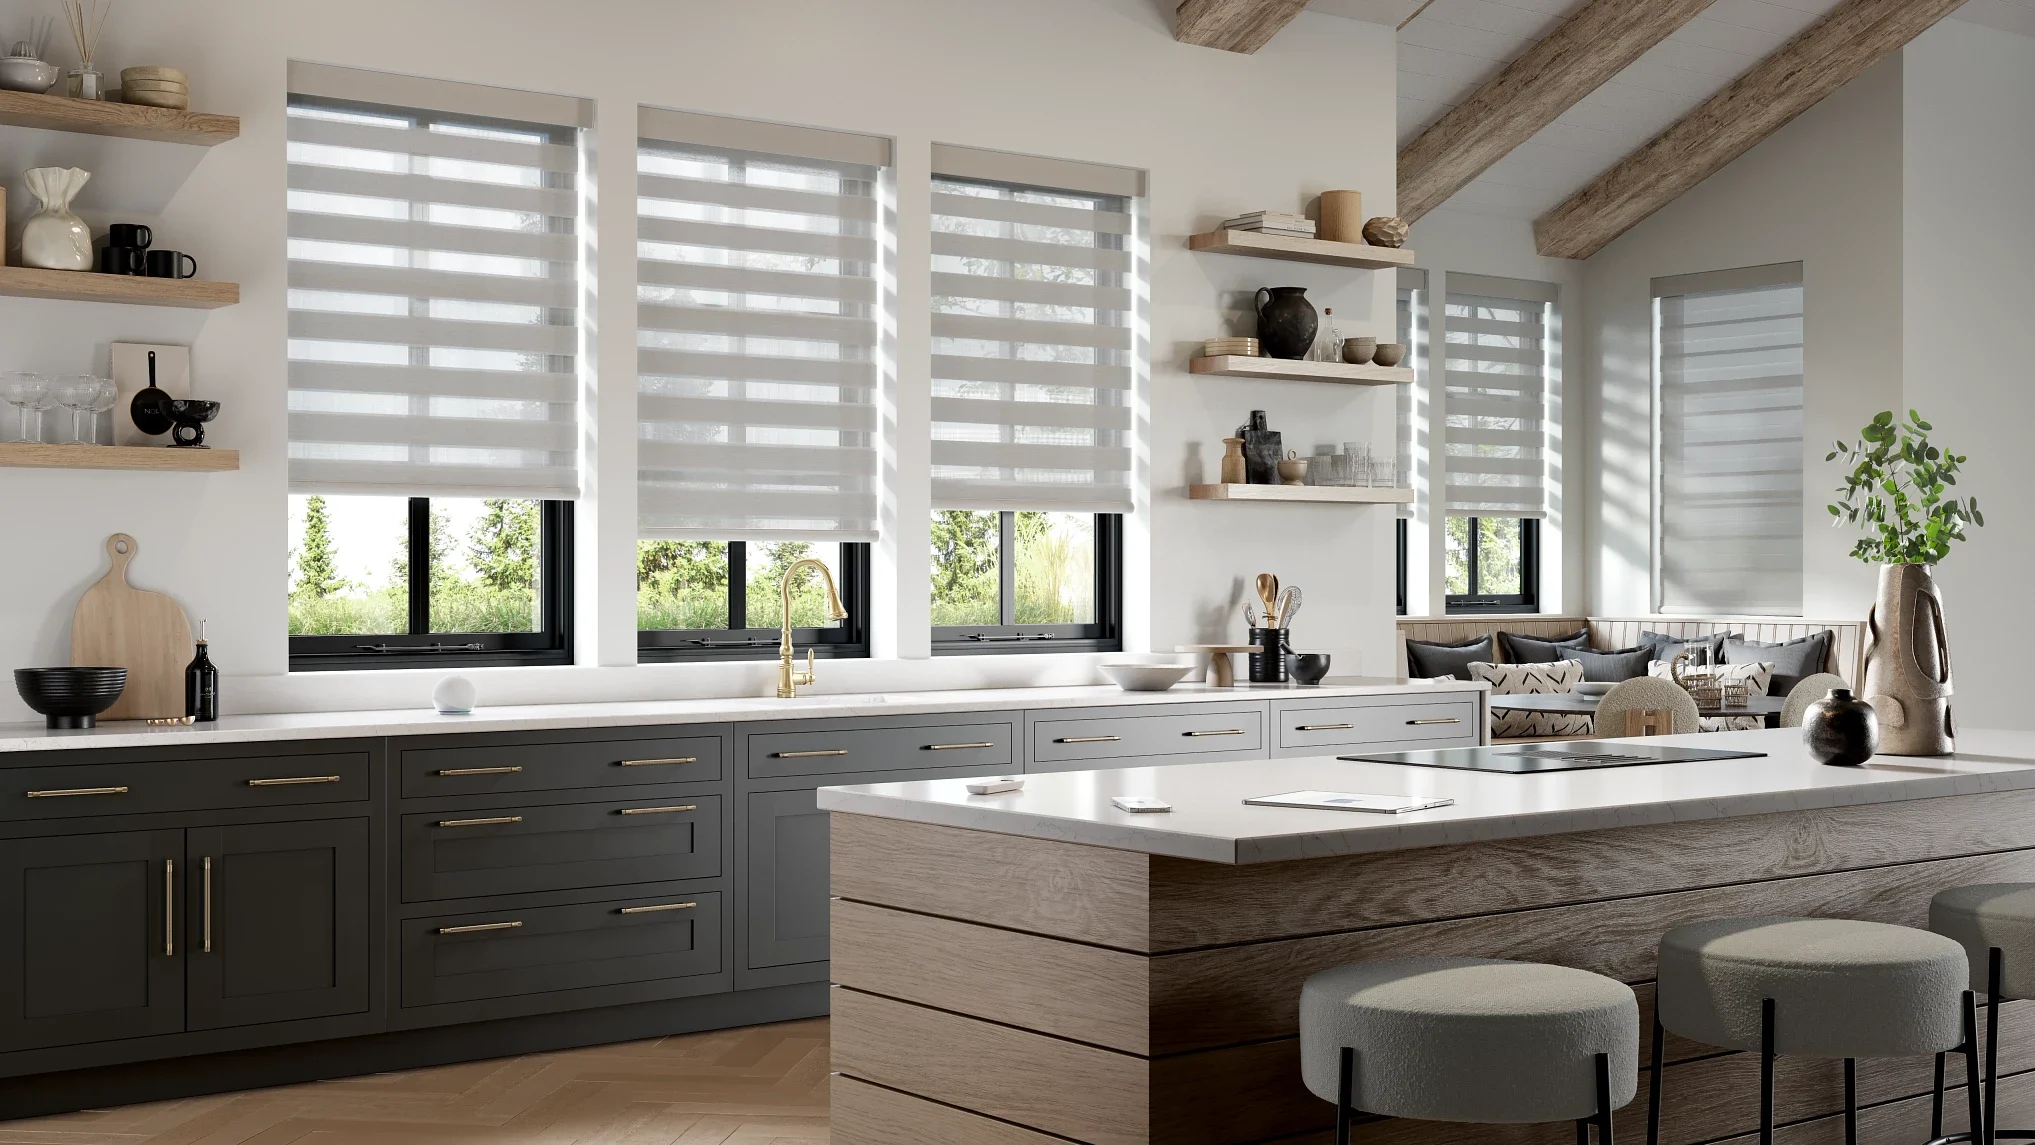 Light banded shades window coverings in kitchen and dinning room.